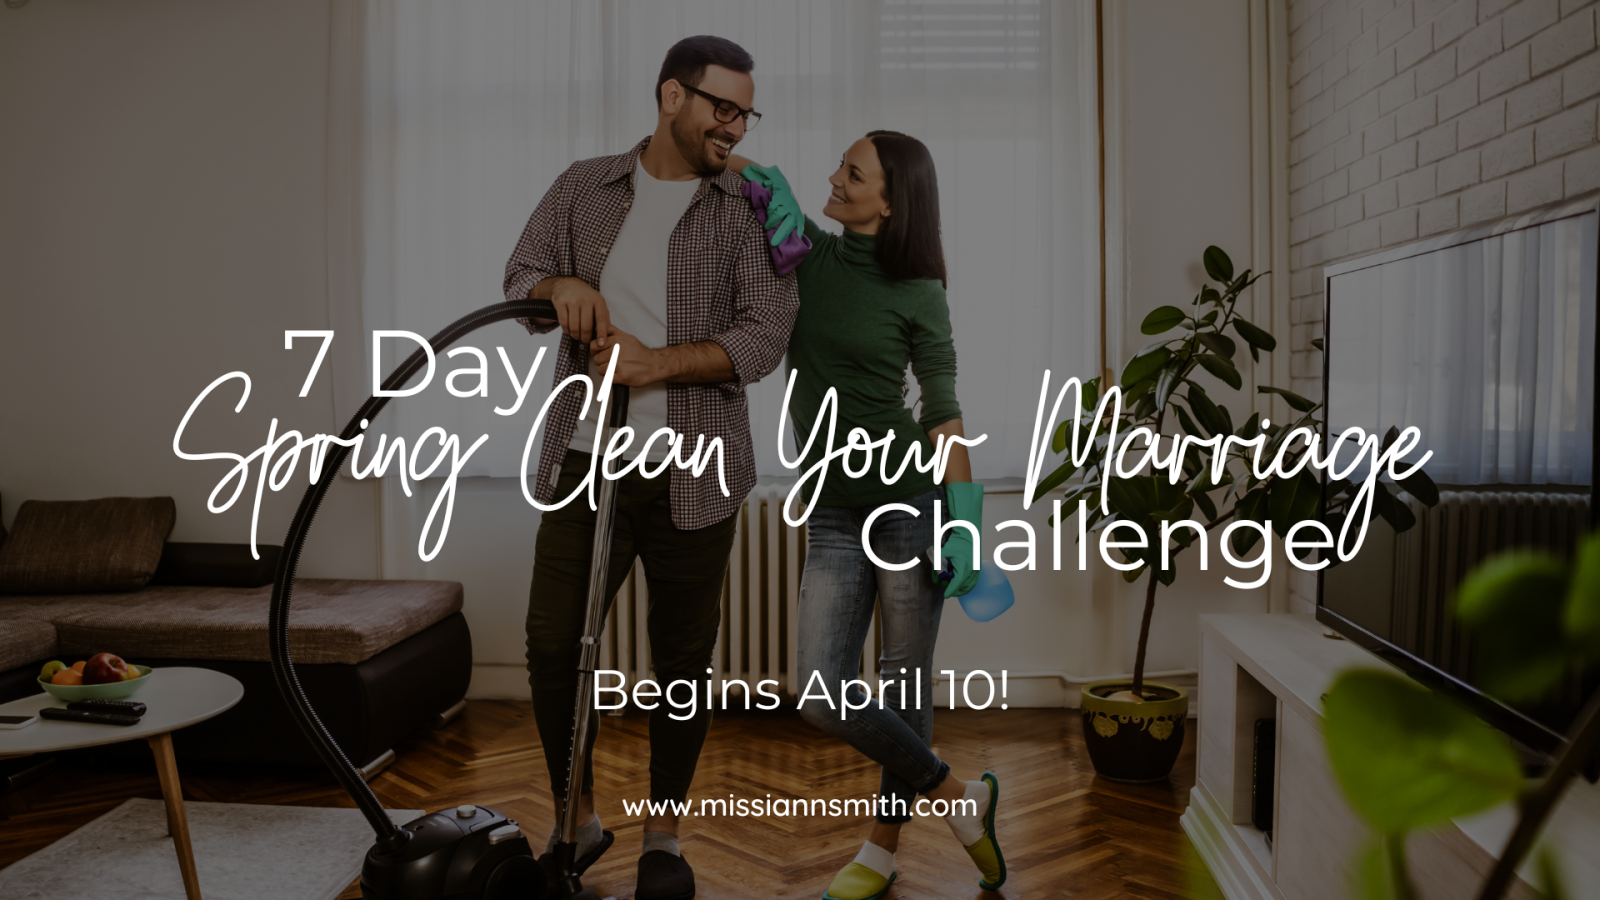 Spring Clean Your Marriage - A 7 Day Challenge